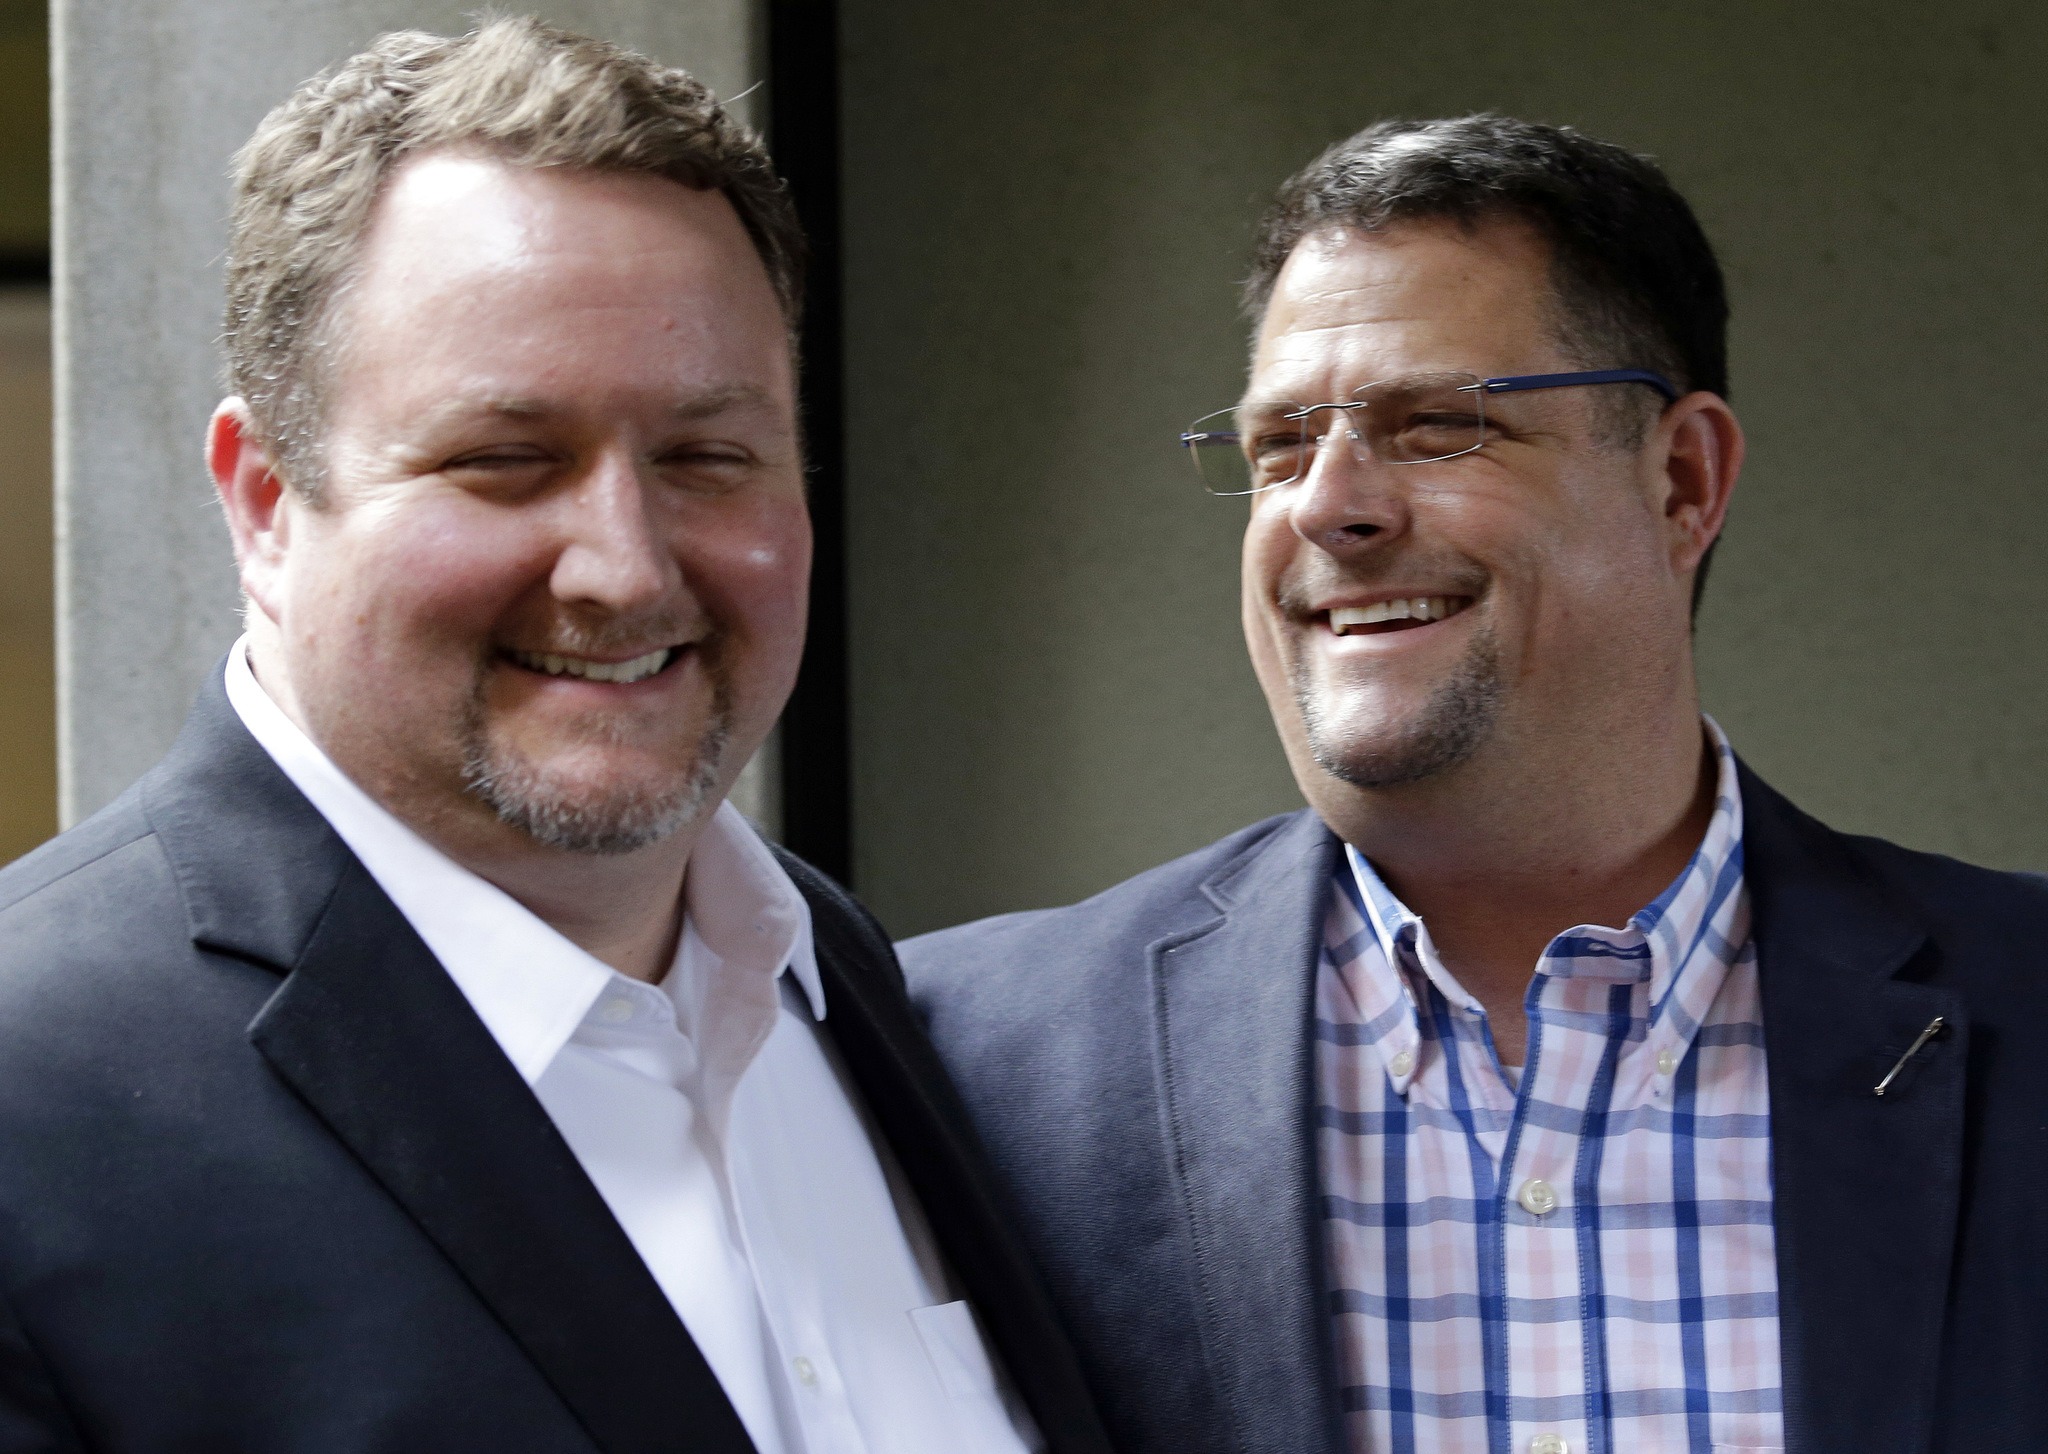 In this Nov. 15, 2016, photo, Curt Freed, left, and his husband, Robert Ingersoll, the couple who sued florist Barronelle Stutzman for refusing to provide services for their wedding, smile after a hearing before the state Supreme Court in Bellevue. (Elaine Thompson/The Associated Press)